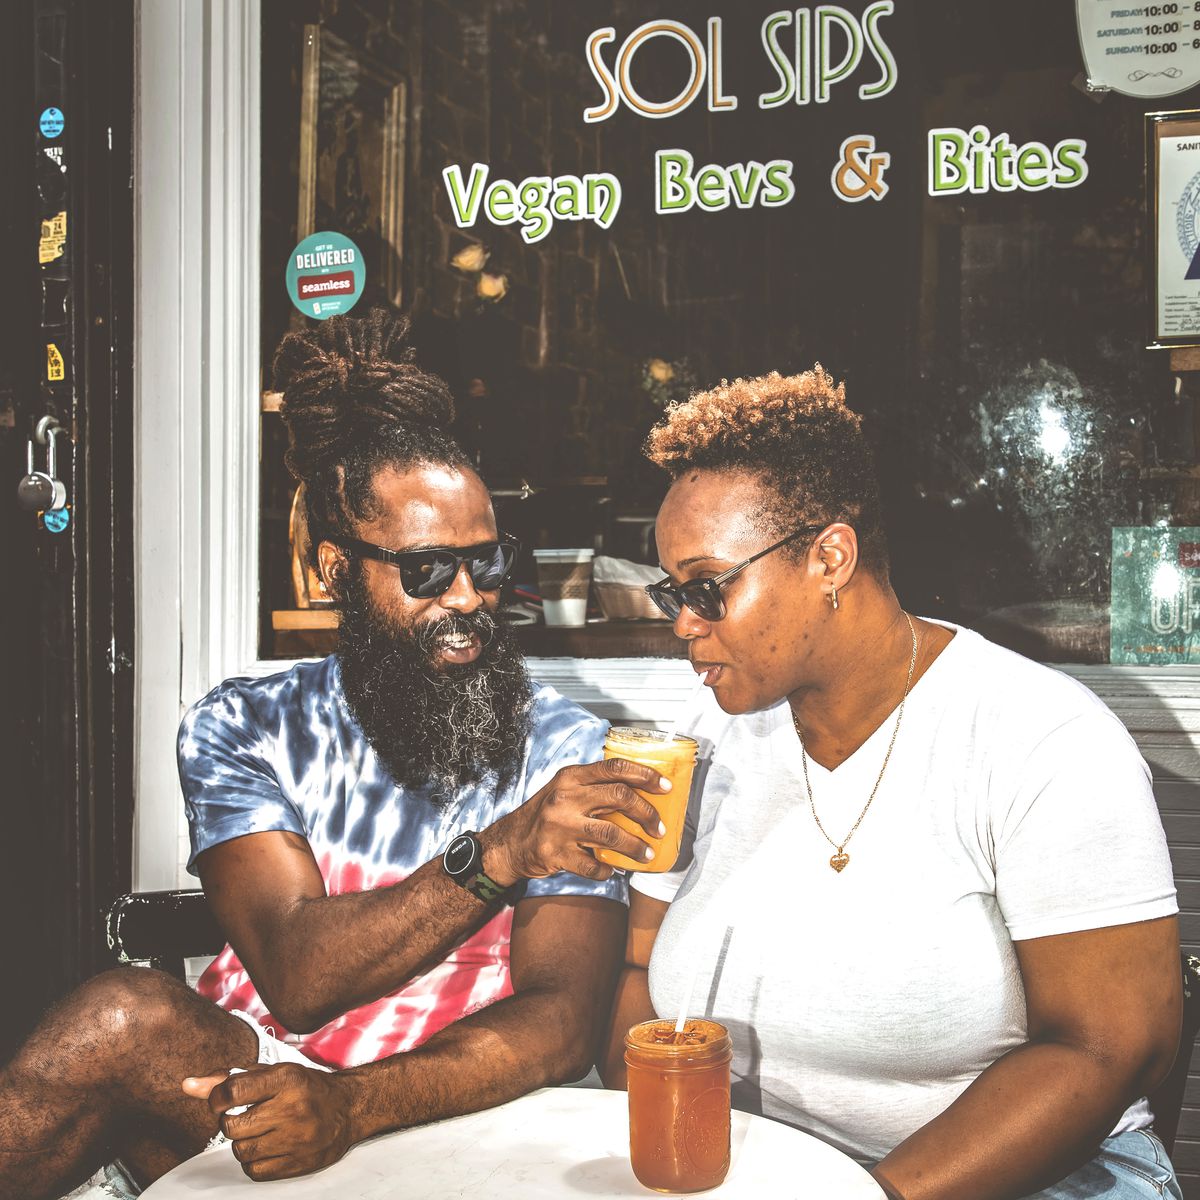 A man wearing sun glasses, with a long beard and dreadlocks, offers a woman a sip of juice in a glass jar. On the right, a woman wearing sunglasses and a white tee with short hair takes a sip.